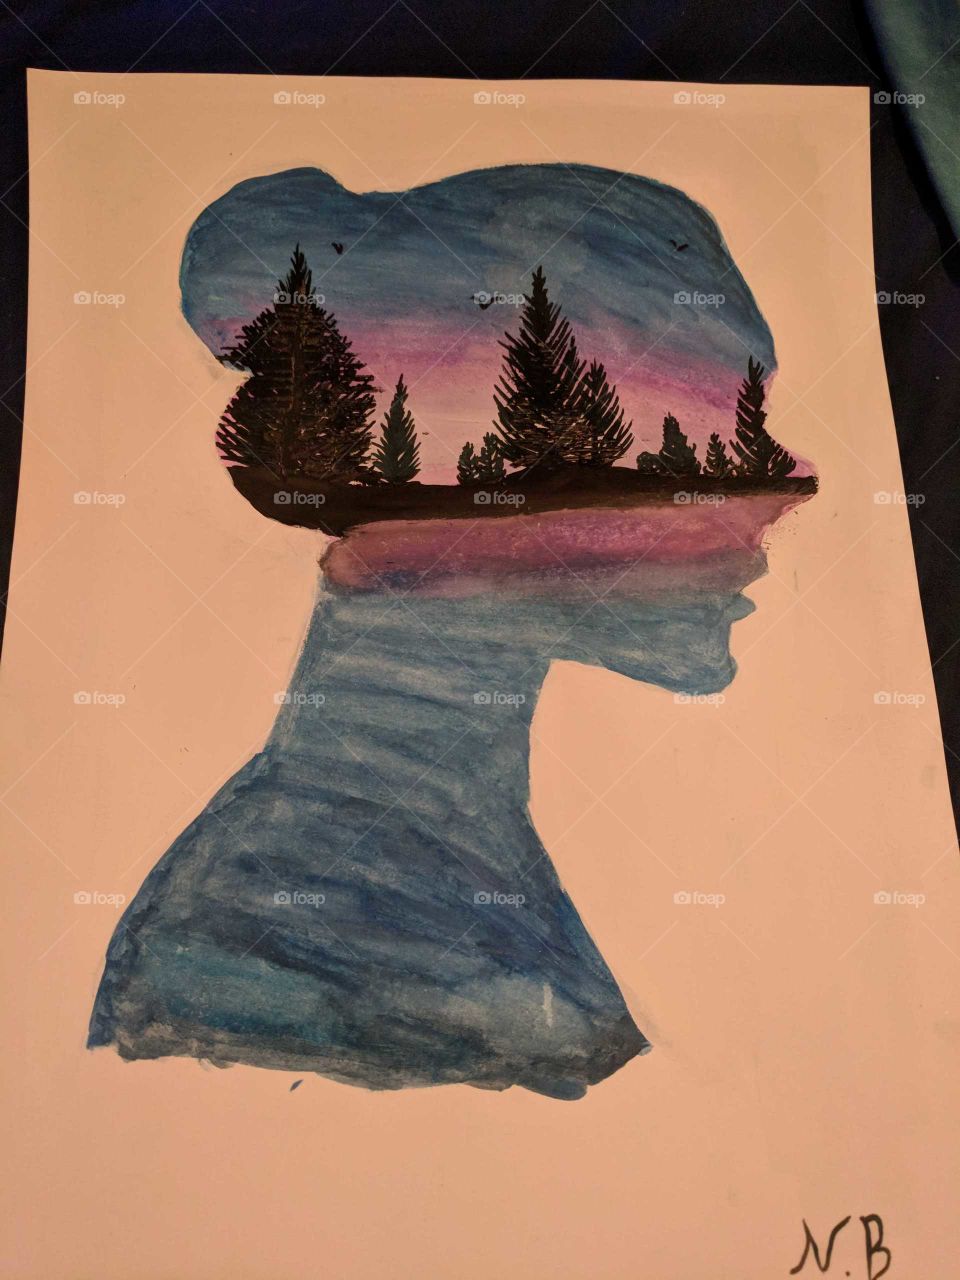 Sons artwork for his sister that was a silhouette of her with a scenery inside.